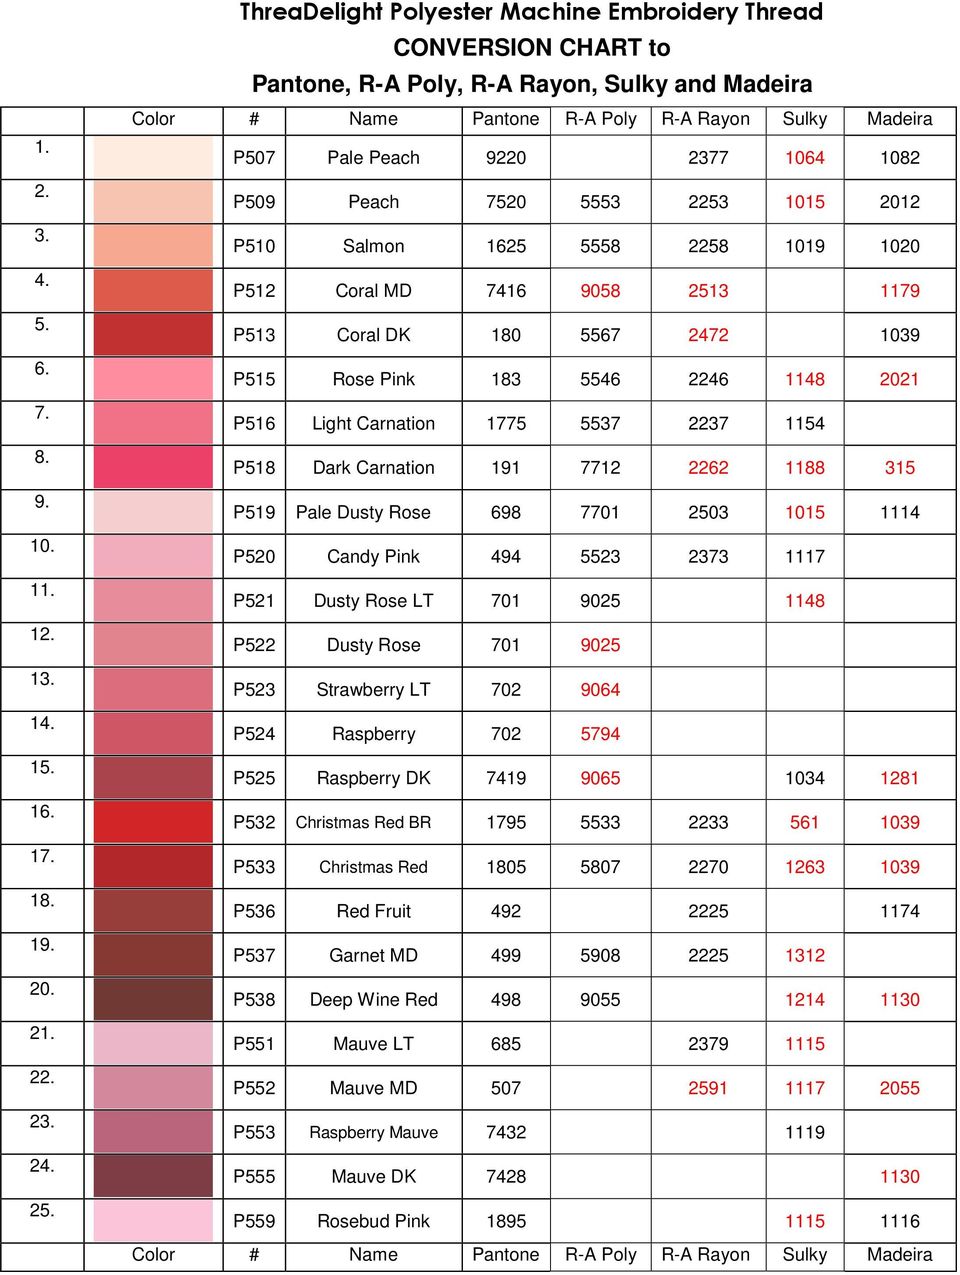 Pantone Embroidery Thread Color Chart